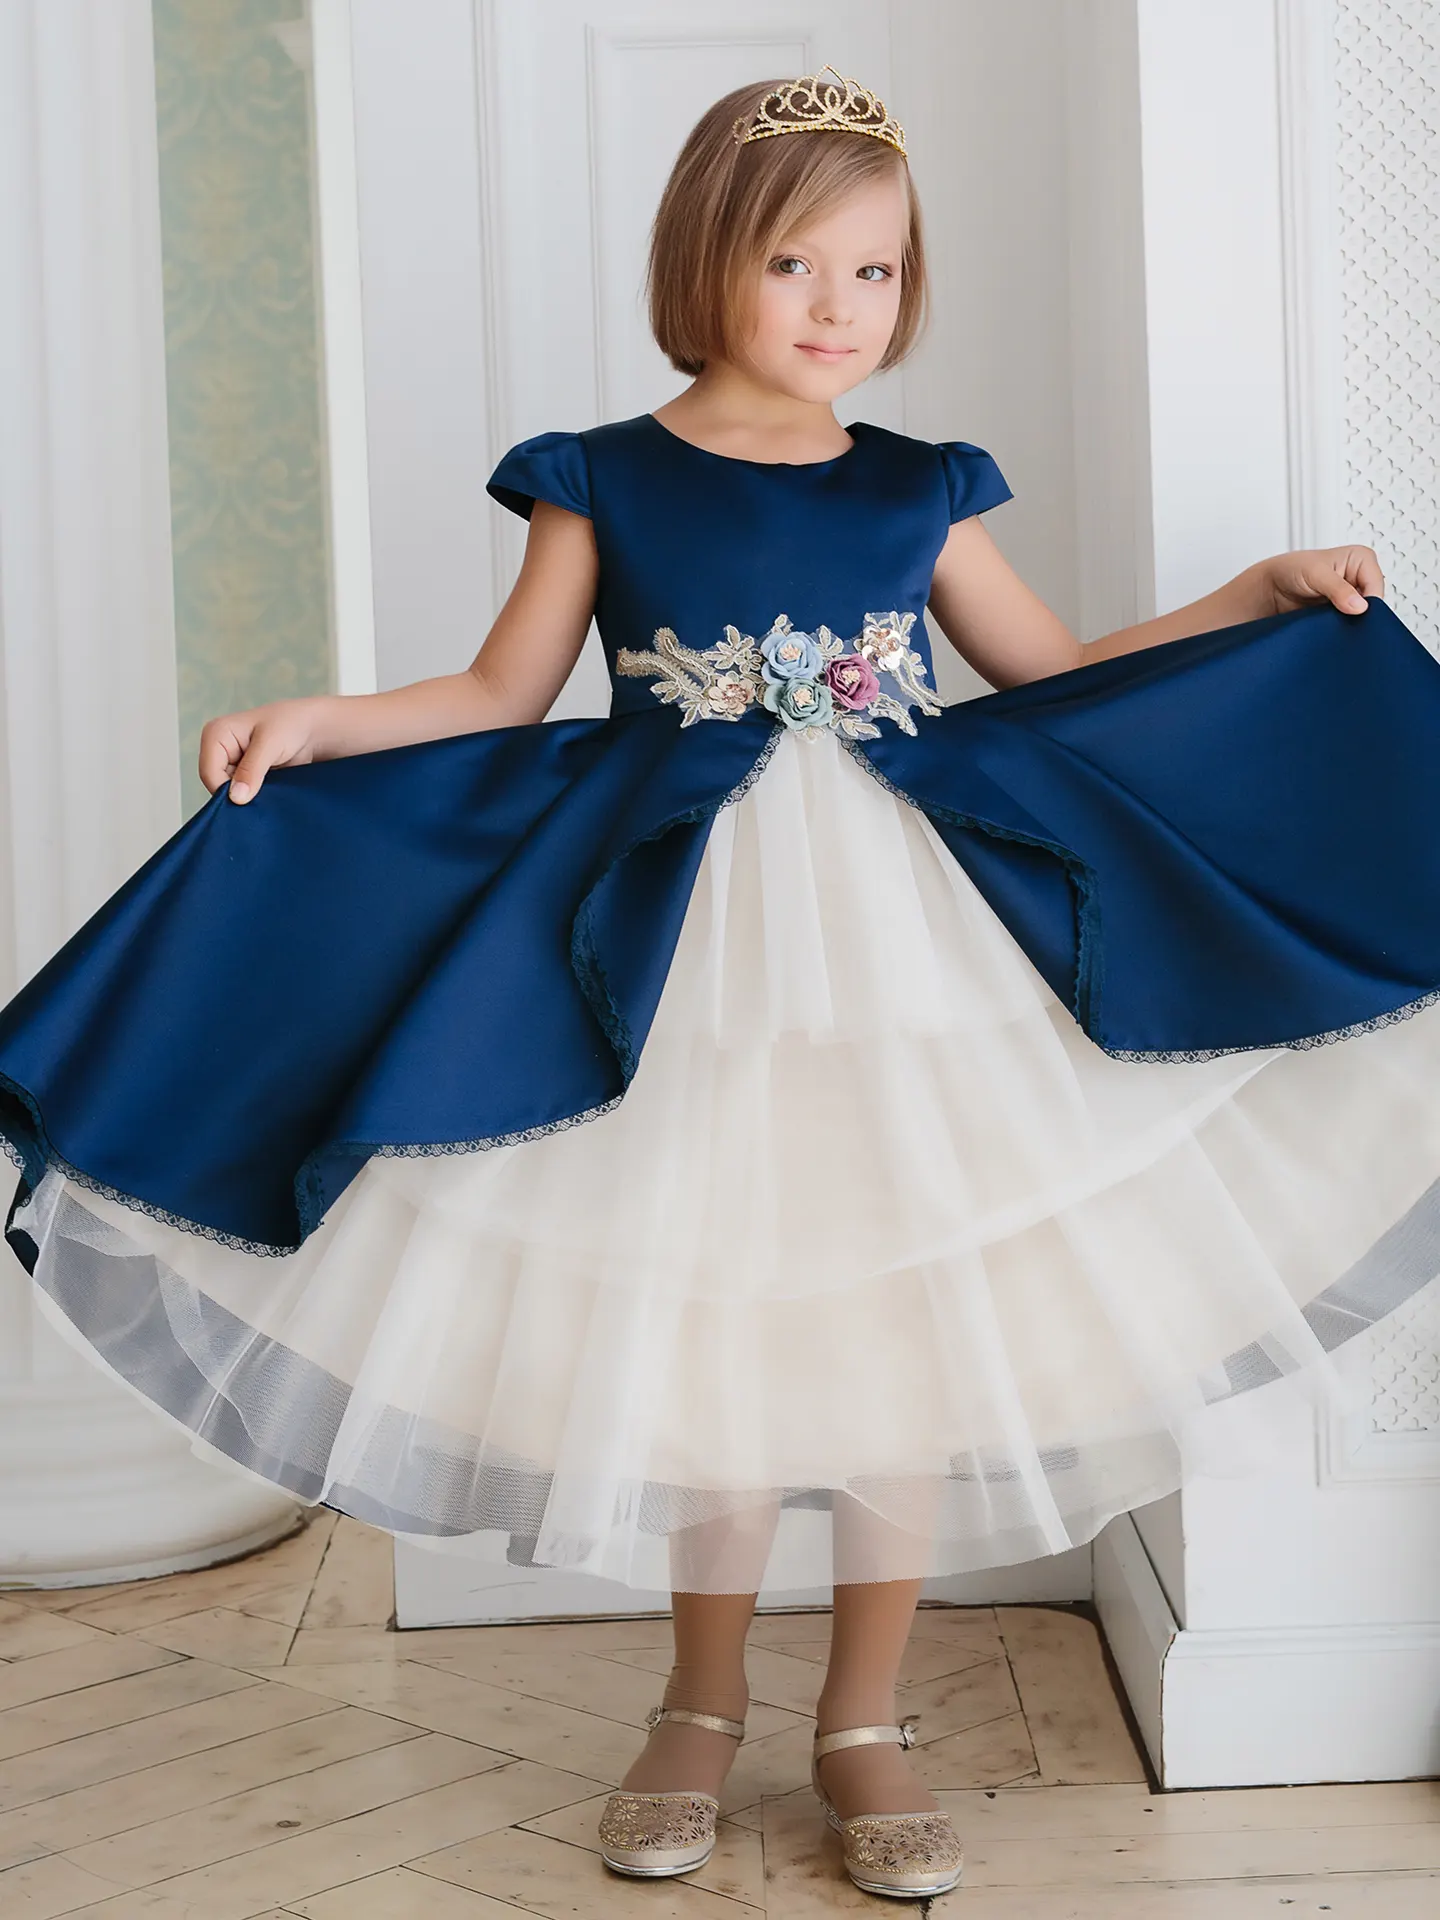 Fashion High-quality, Comfortable girl's dress for a special occasion with wide tulle dance skirt